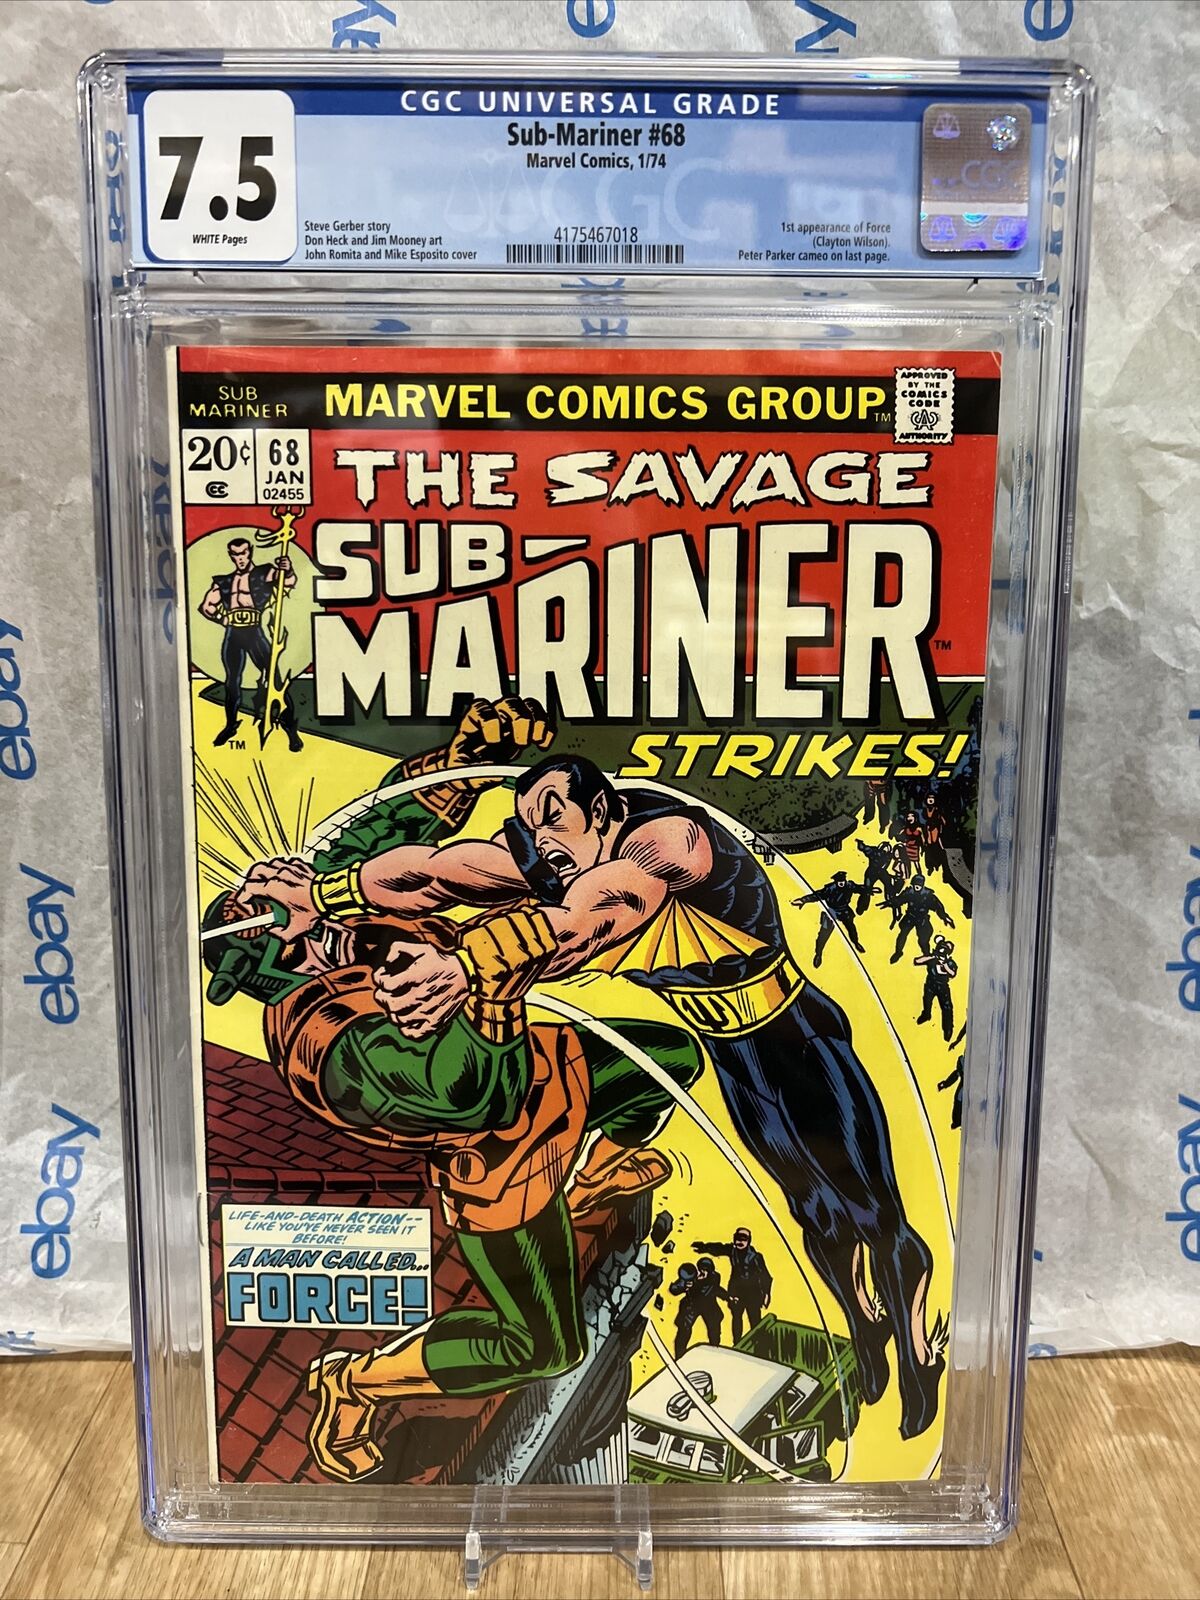 Sub-Mariner #68 1974 CGC 7.5 wp - 1st appearance of Force. Peter Parker cameo